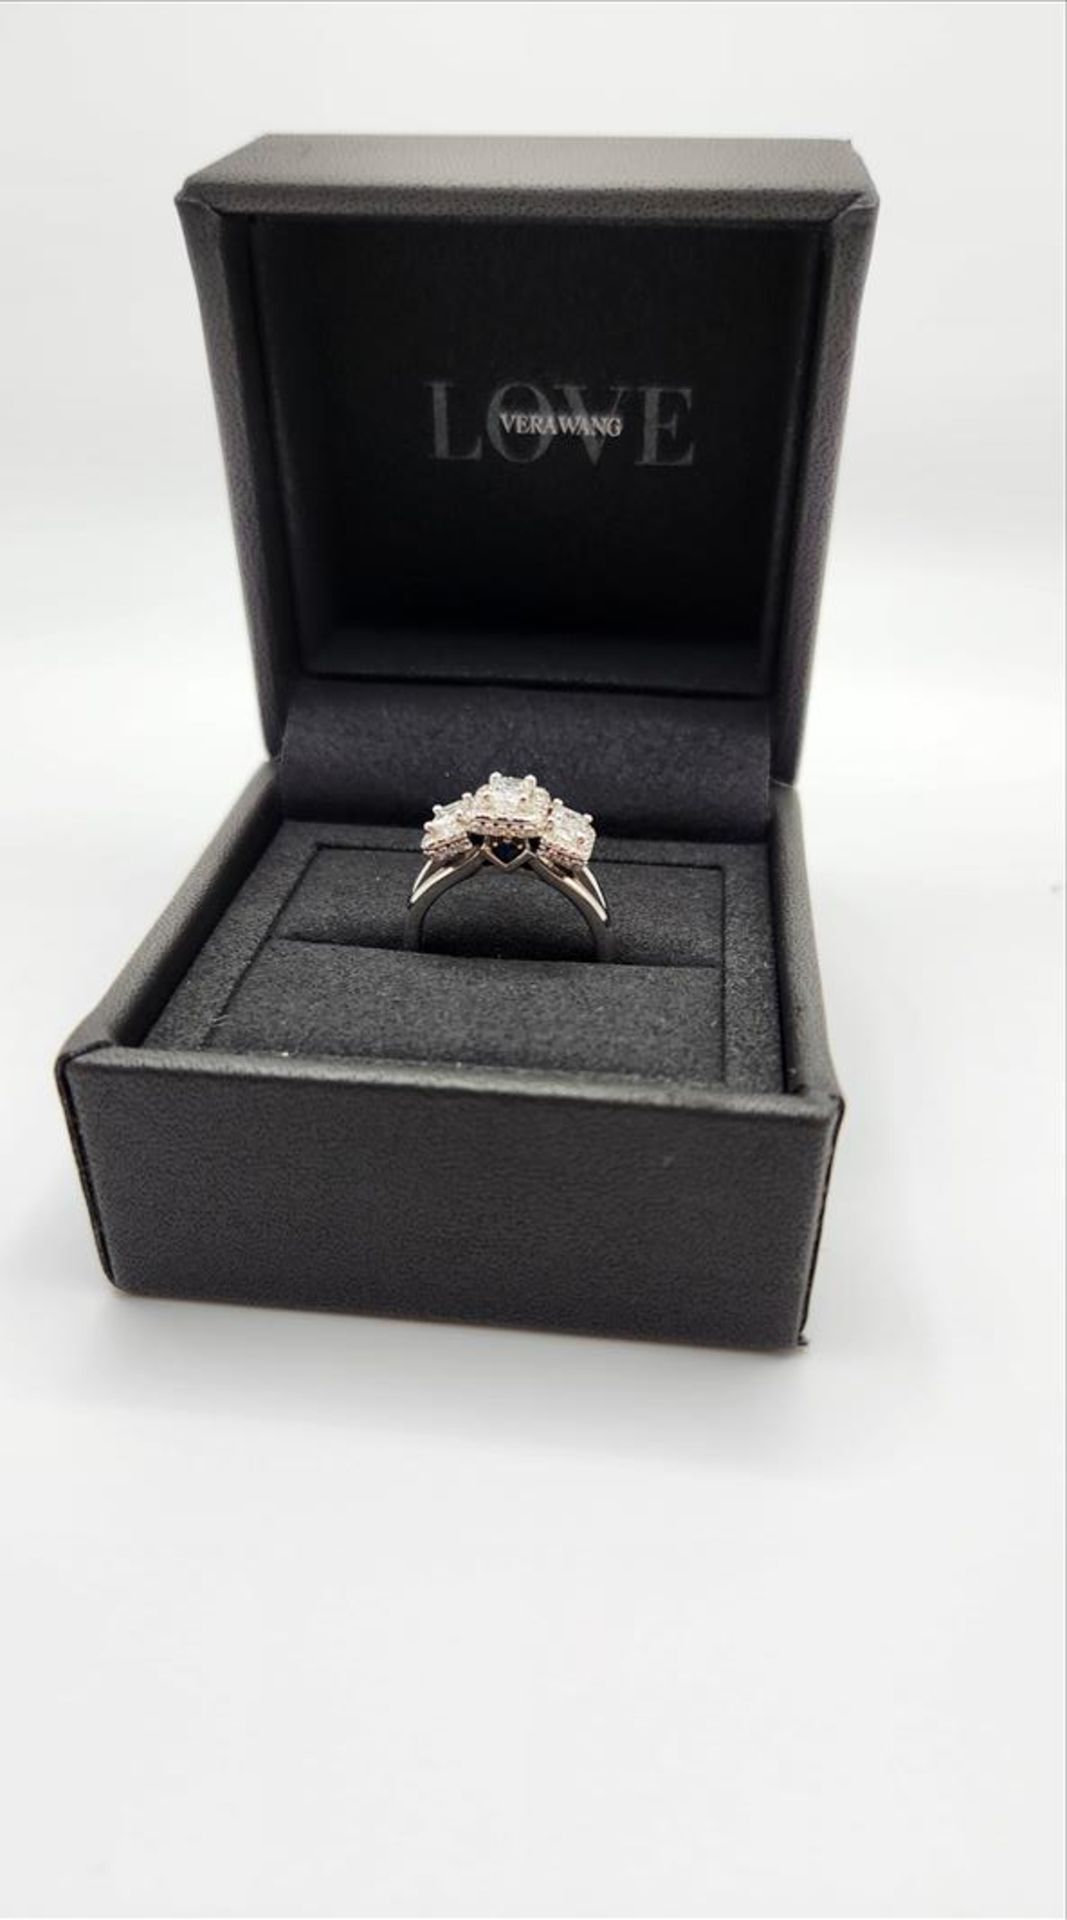 One lady’s stamped and tested 14kt VERA WANG LOVE collection diamond ring. Contained across the - Image 8 of 11